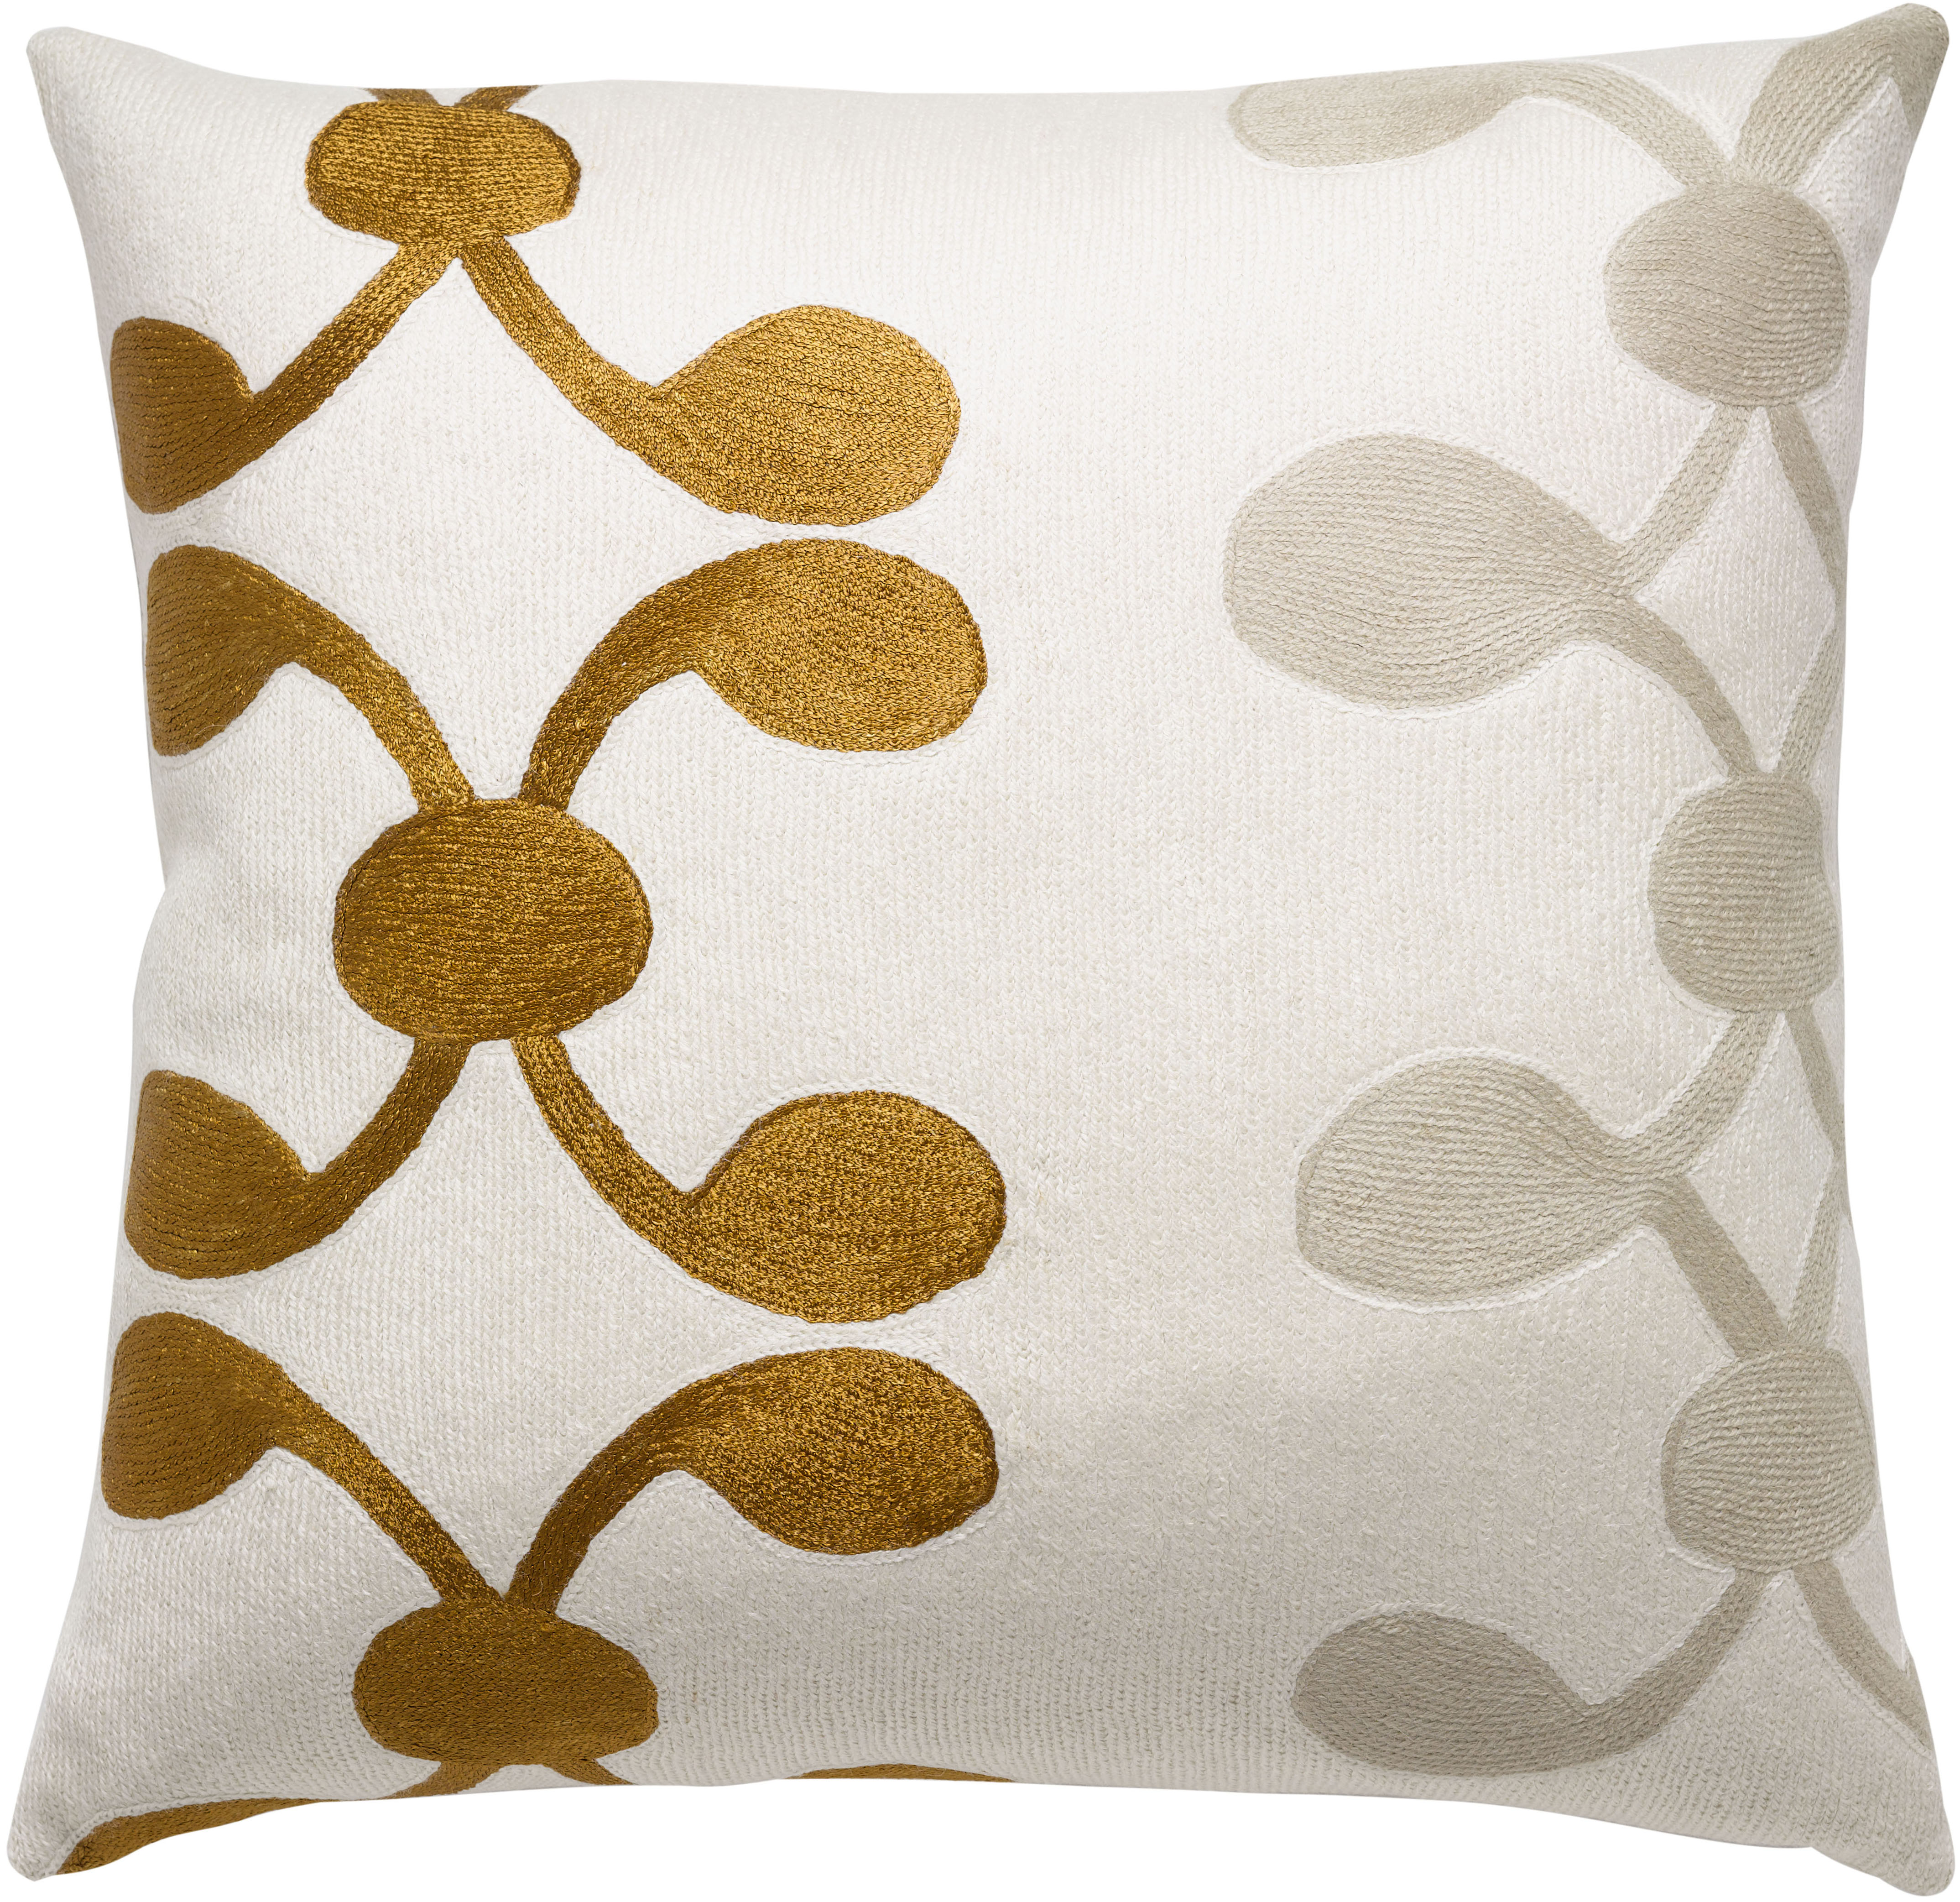 Hand-Embroidered Chain Stitch Pillows: 18x18 :: Celine :: Judy Ross Textiles